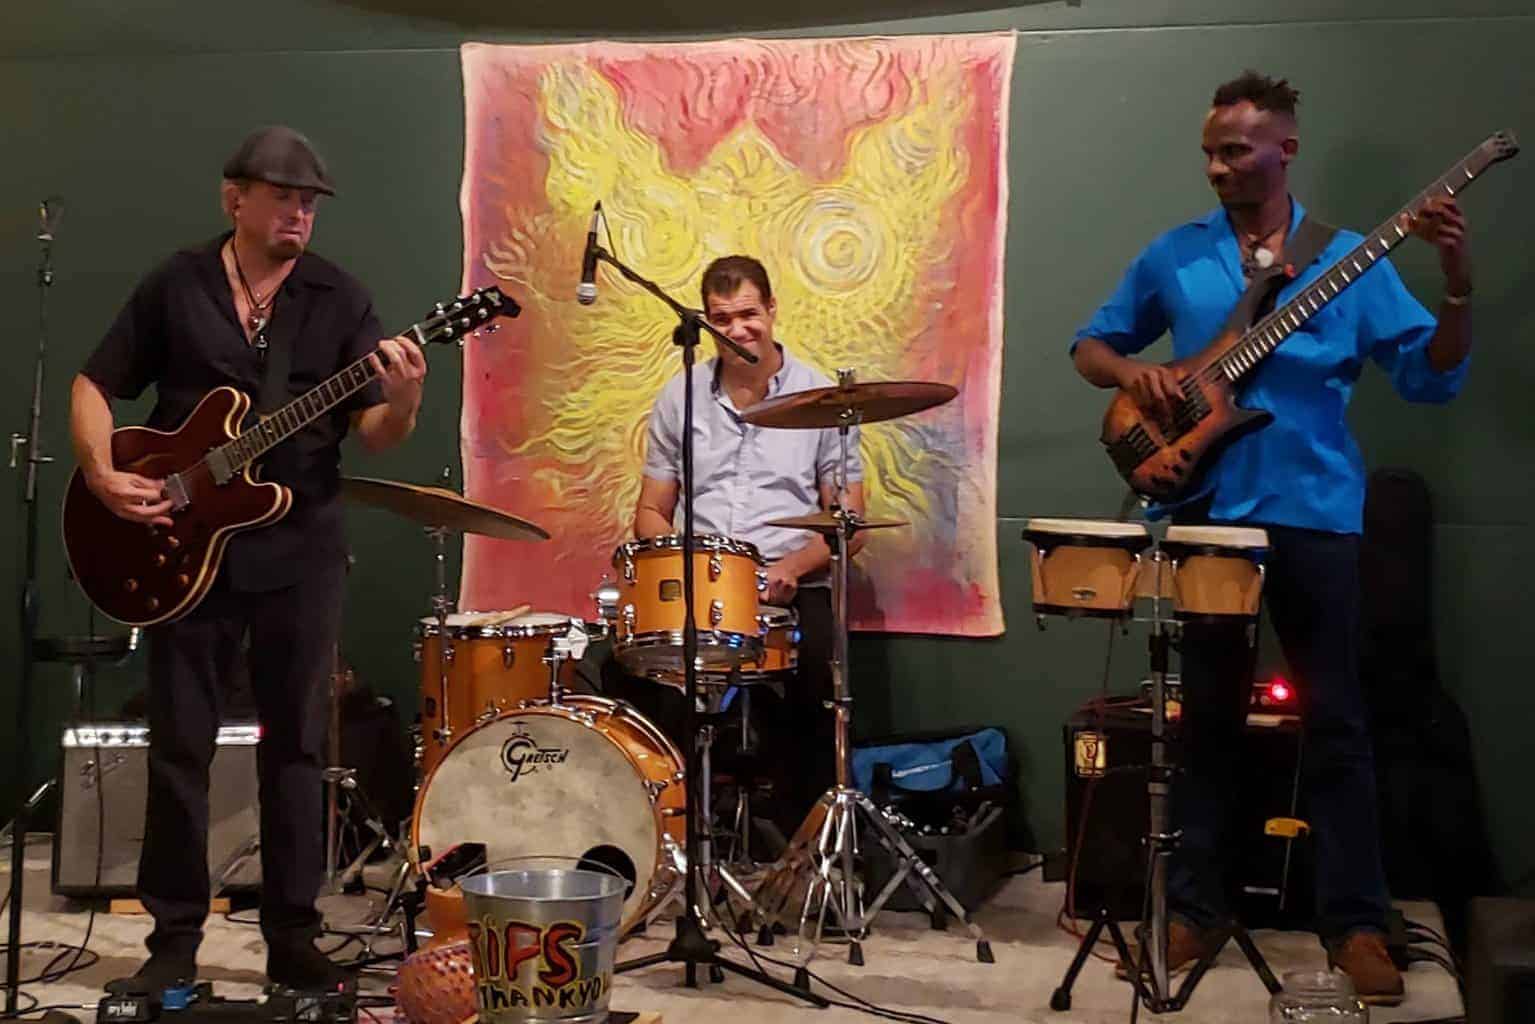 JP Soars and the Red Hots at Northwood Art Music Warehouse